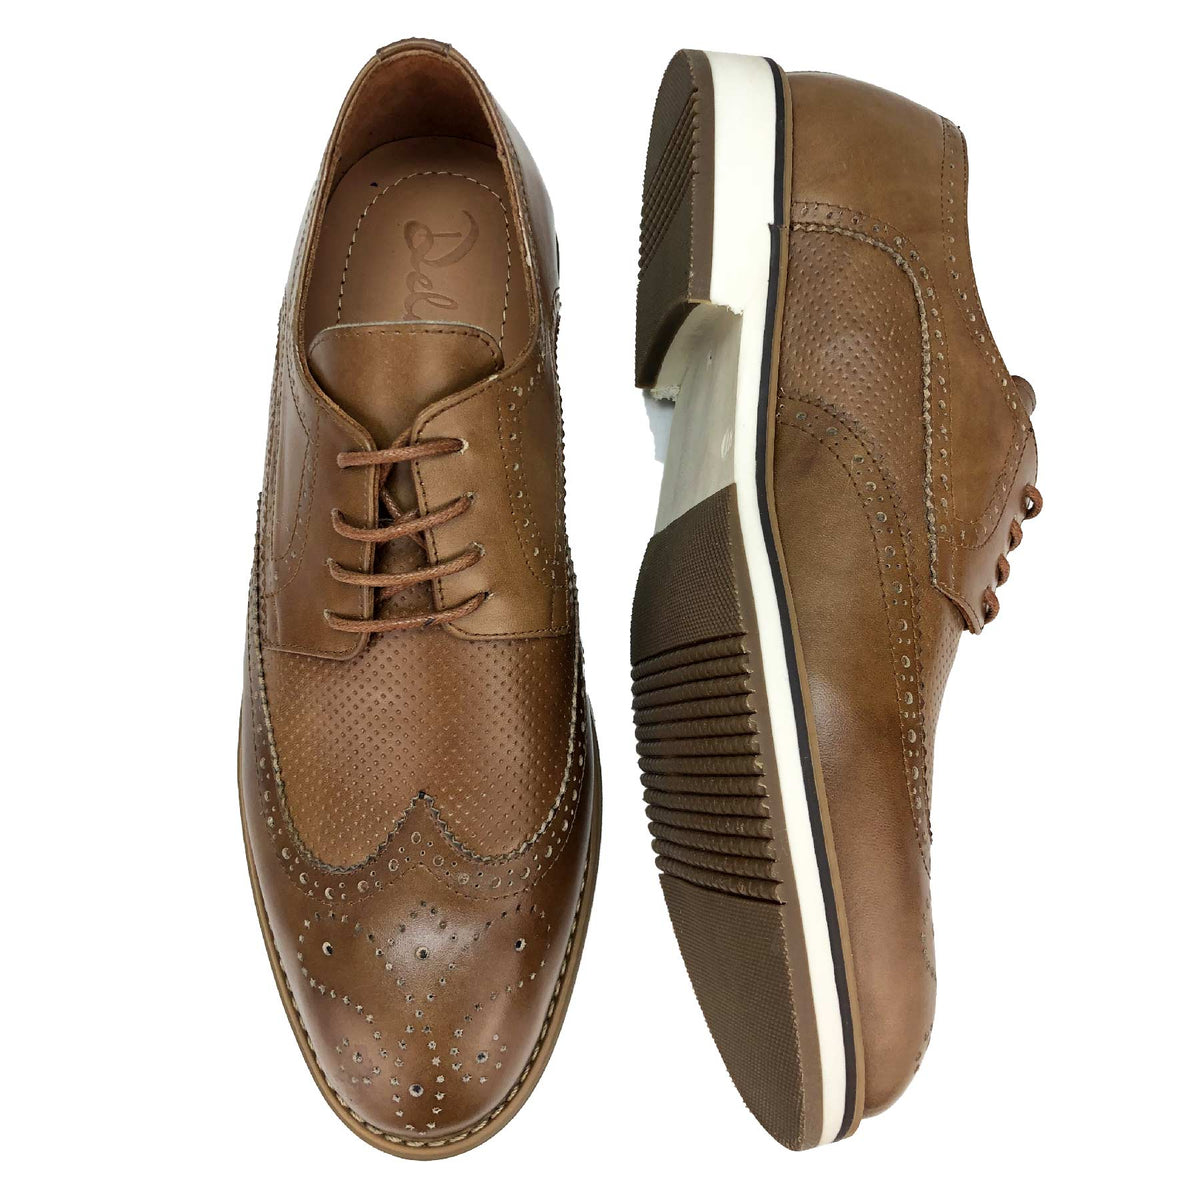 CH201-020 Chaussure Cuir Taba - deluxe-maroc